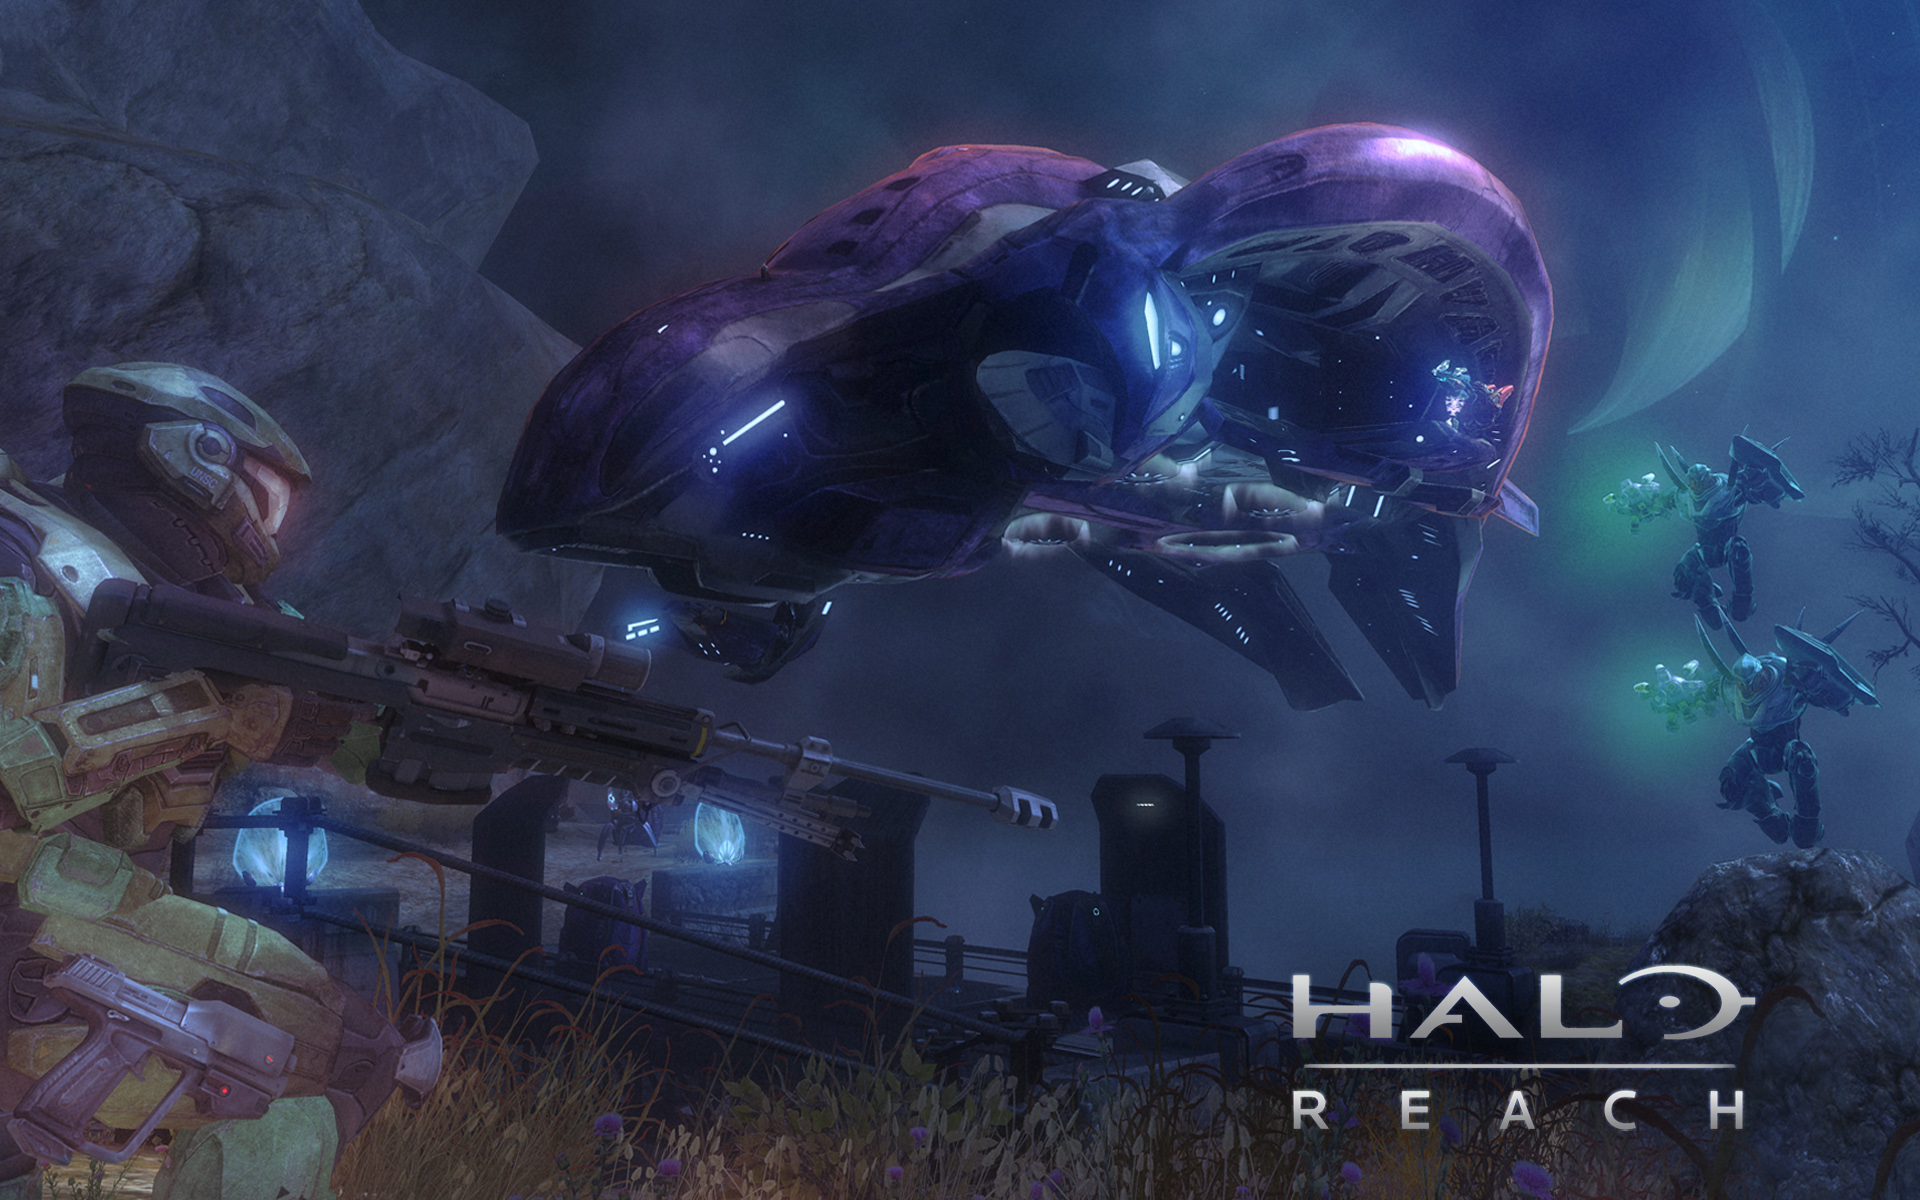 Halo Reach Widescreen wallpapers HD free   164760